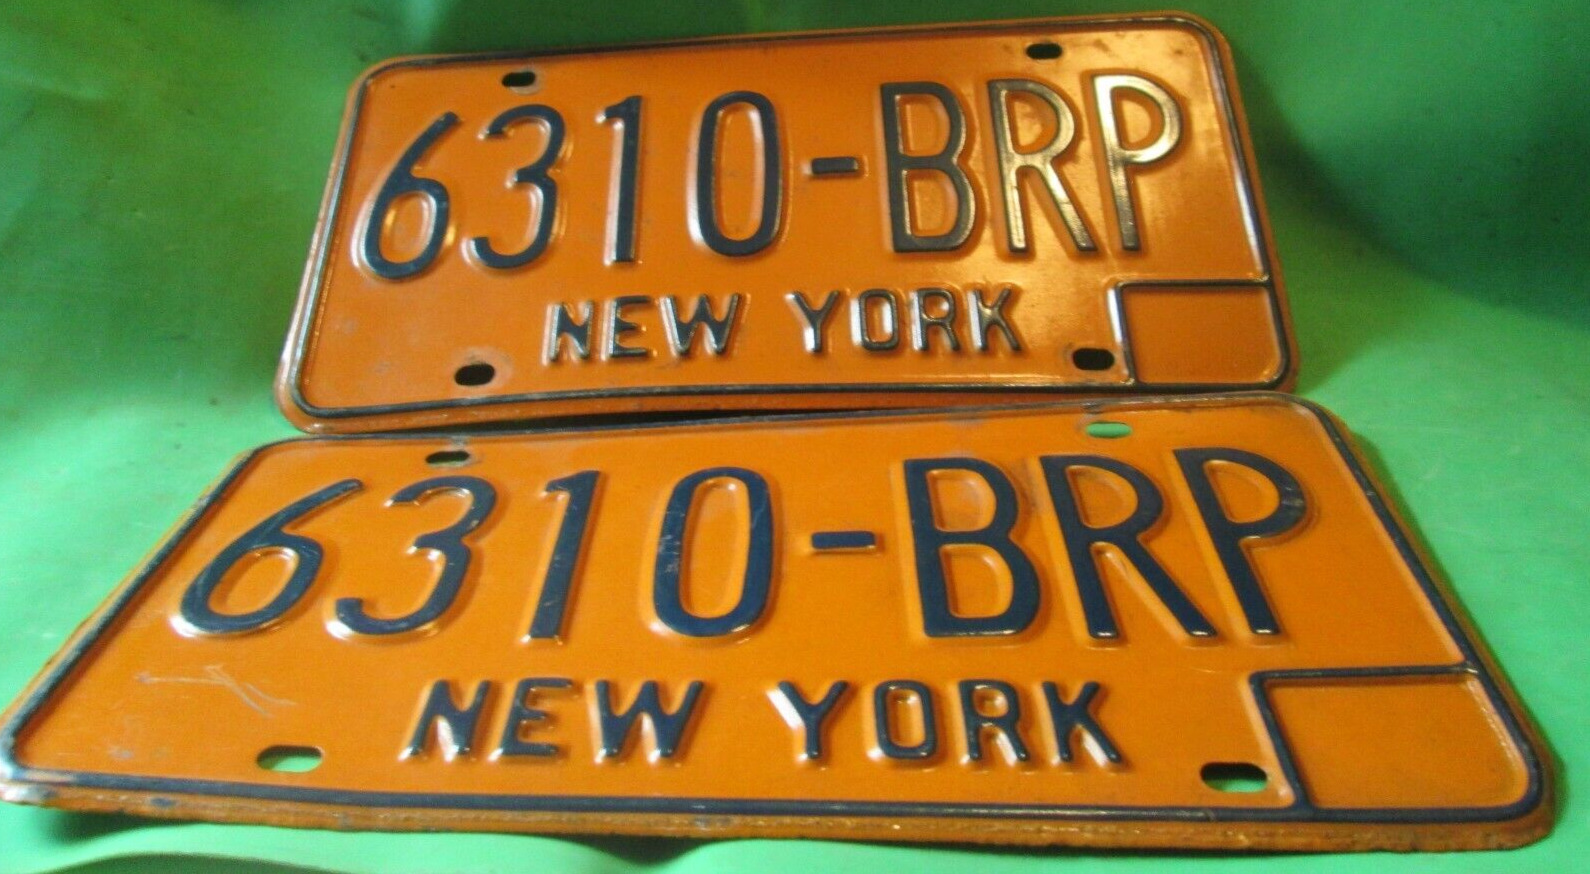 VINTAGE US NEW YORK STATE NY LICENSE PLATE TAG 6310 BRP MORE PLATES LISTED